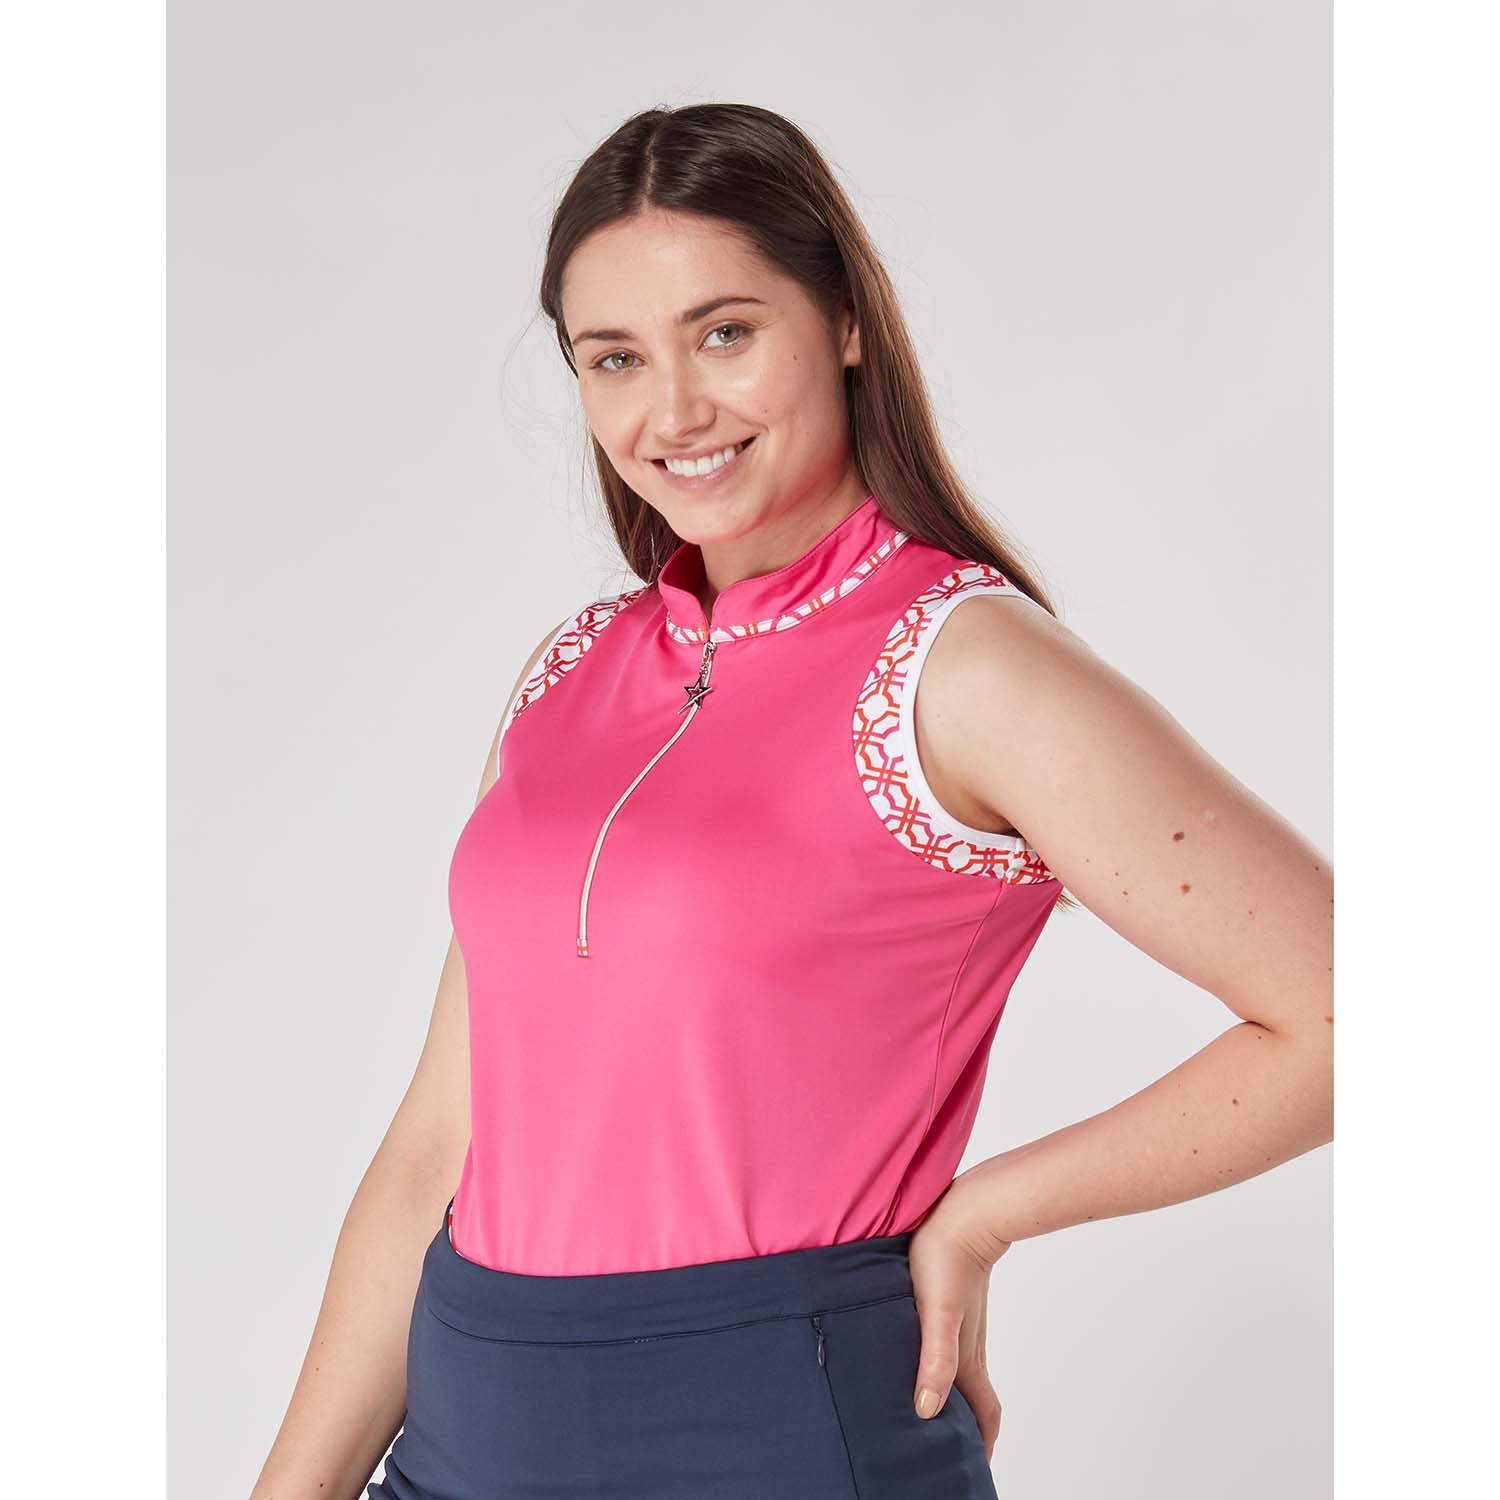 Swing Out Sister Ladies Sleeveless Polo in Lush Pink and Mandarin with Zip-Neck